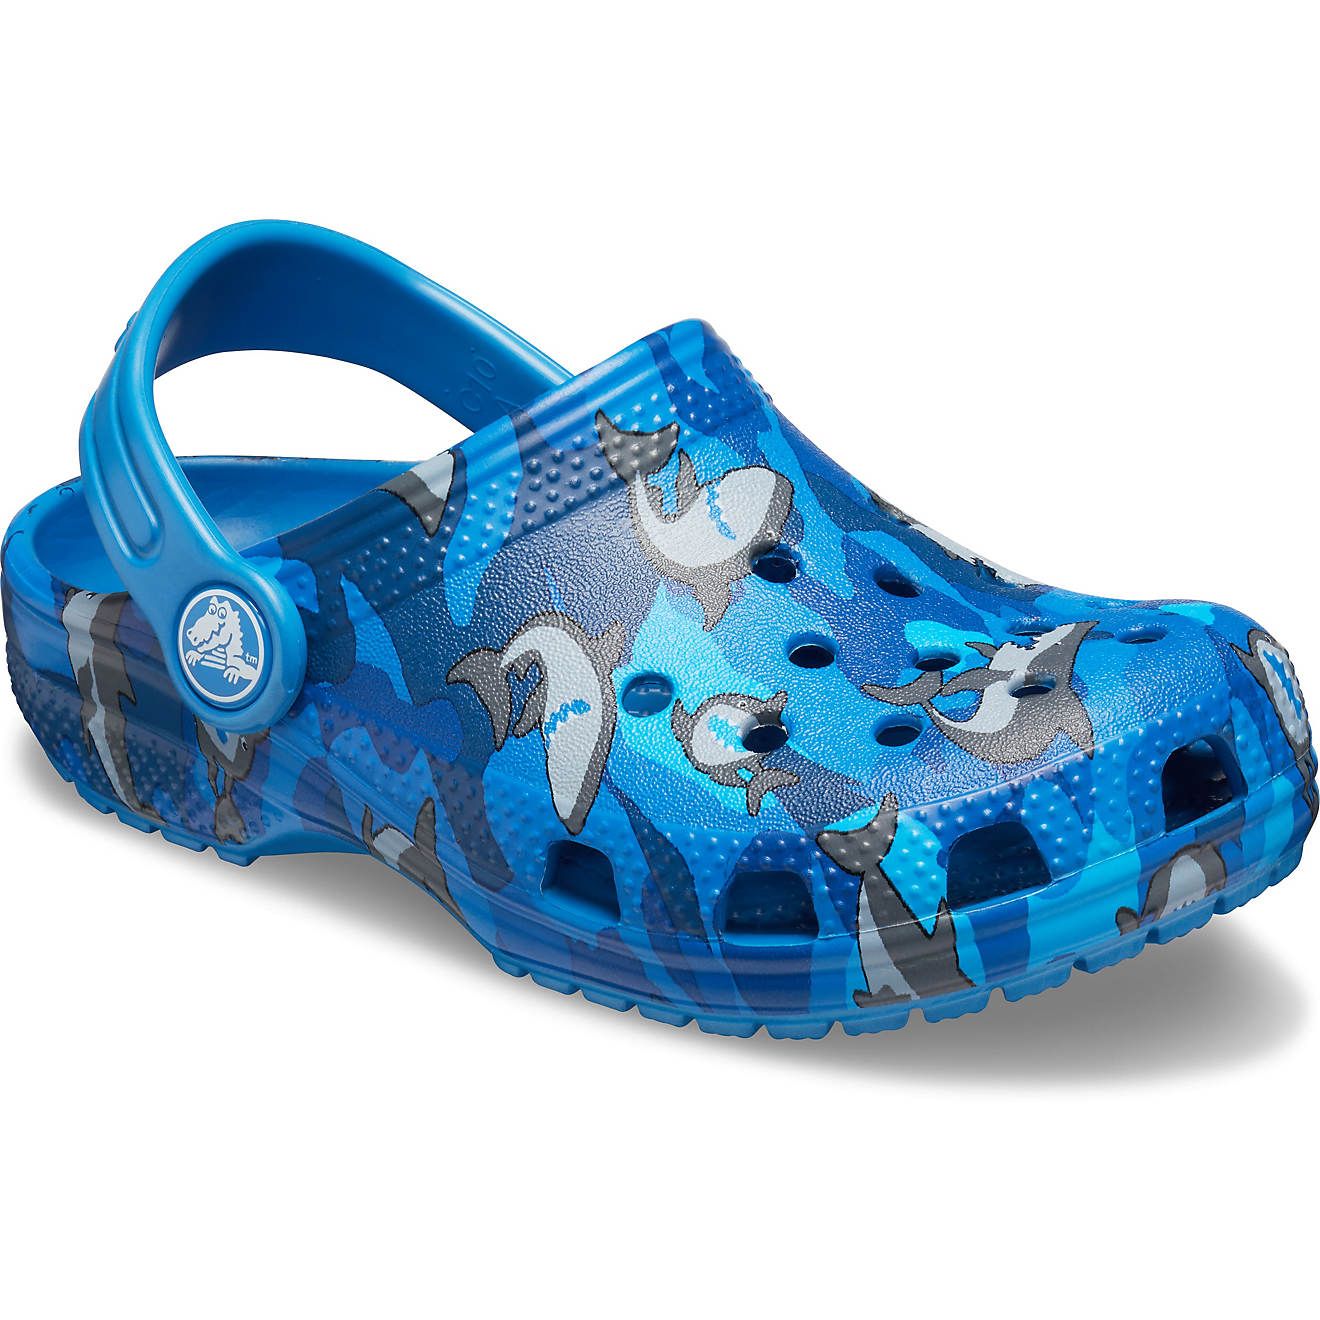 Celebrate Croctober at Academy with these fresh new Crocs